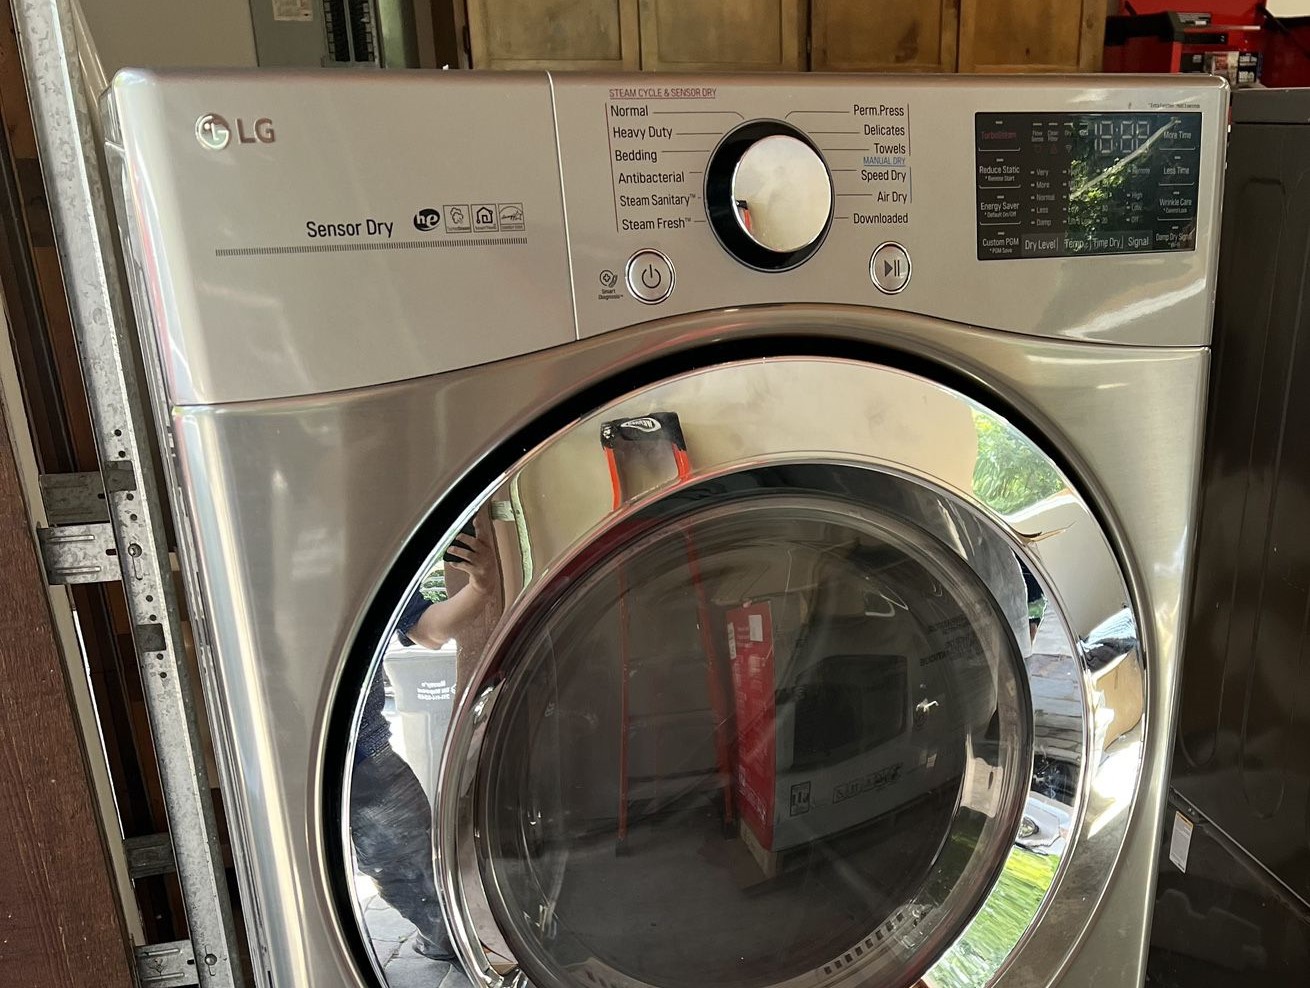 How To Fix The Error Code E13 For LG Dryer